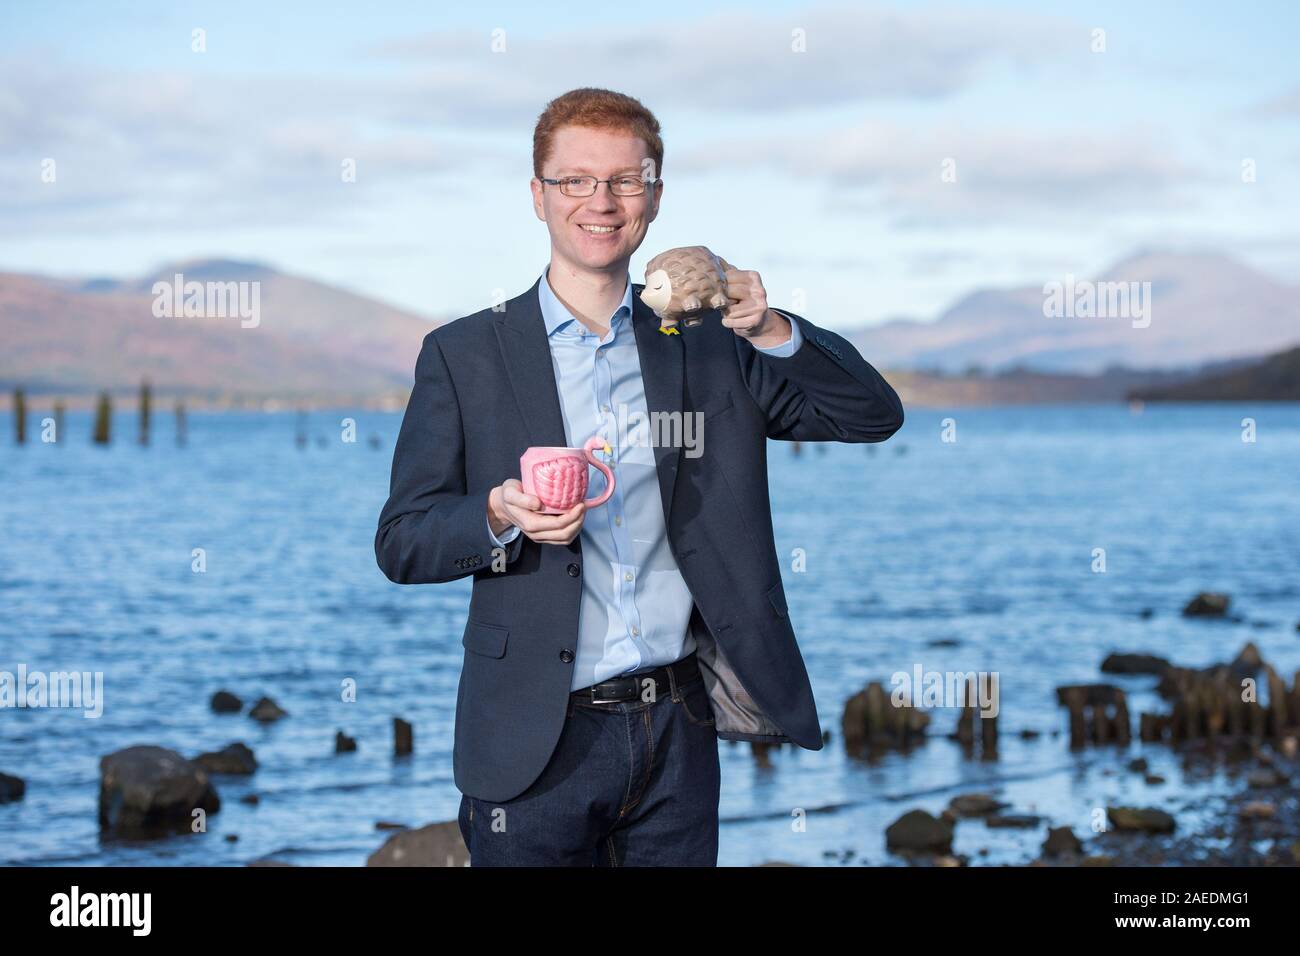 Balloch, UK. 5 November 2019. Pictured: Ross Greer MSP  - Member of the Scottish Parliament for the West Scotland region. Seen at a photo op on the shores of Loch Lomond to highlight the natural beauty of the region and to stop the proposed development of the Flamingo Land theme park.  So far there has been more than 57,000 objections to the plans.   Credit: Colin Fisher/Alamy Live news. Stock Photo